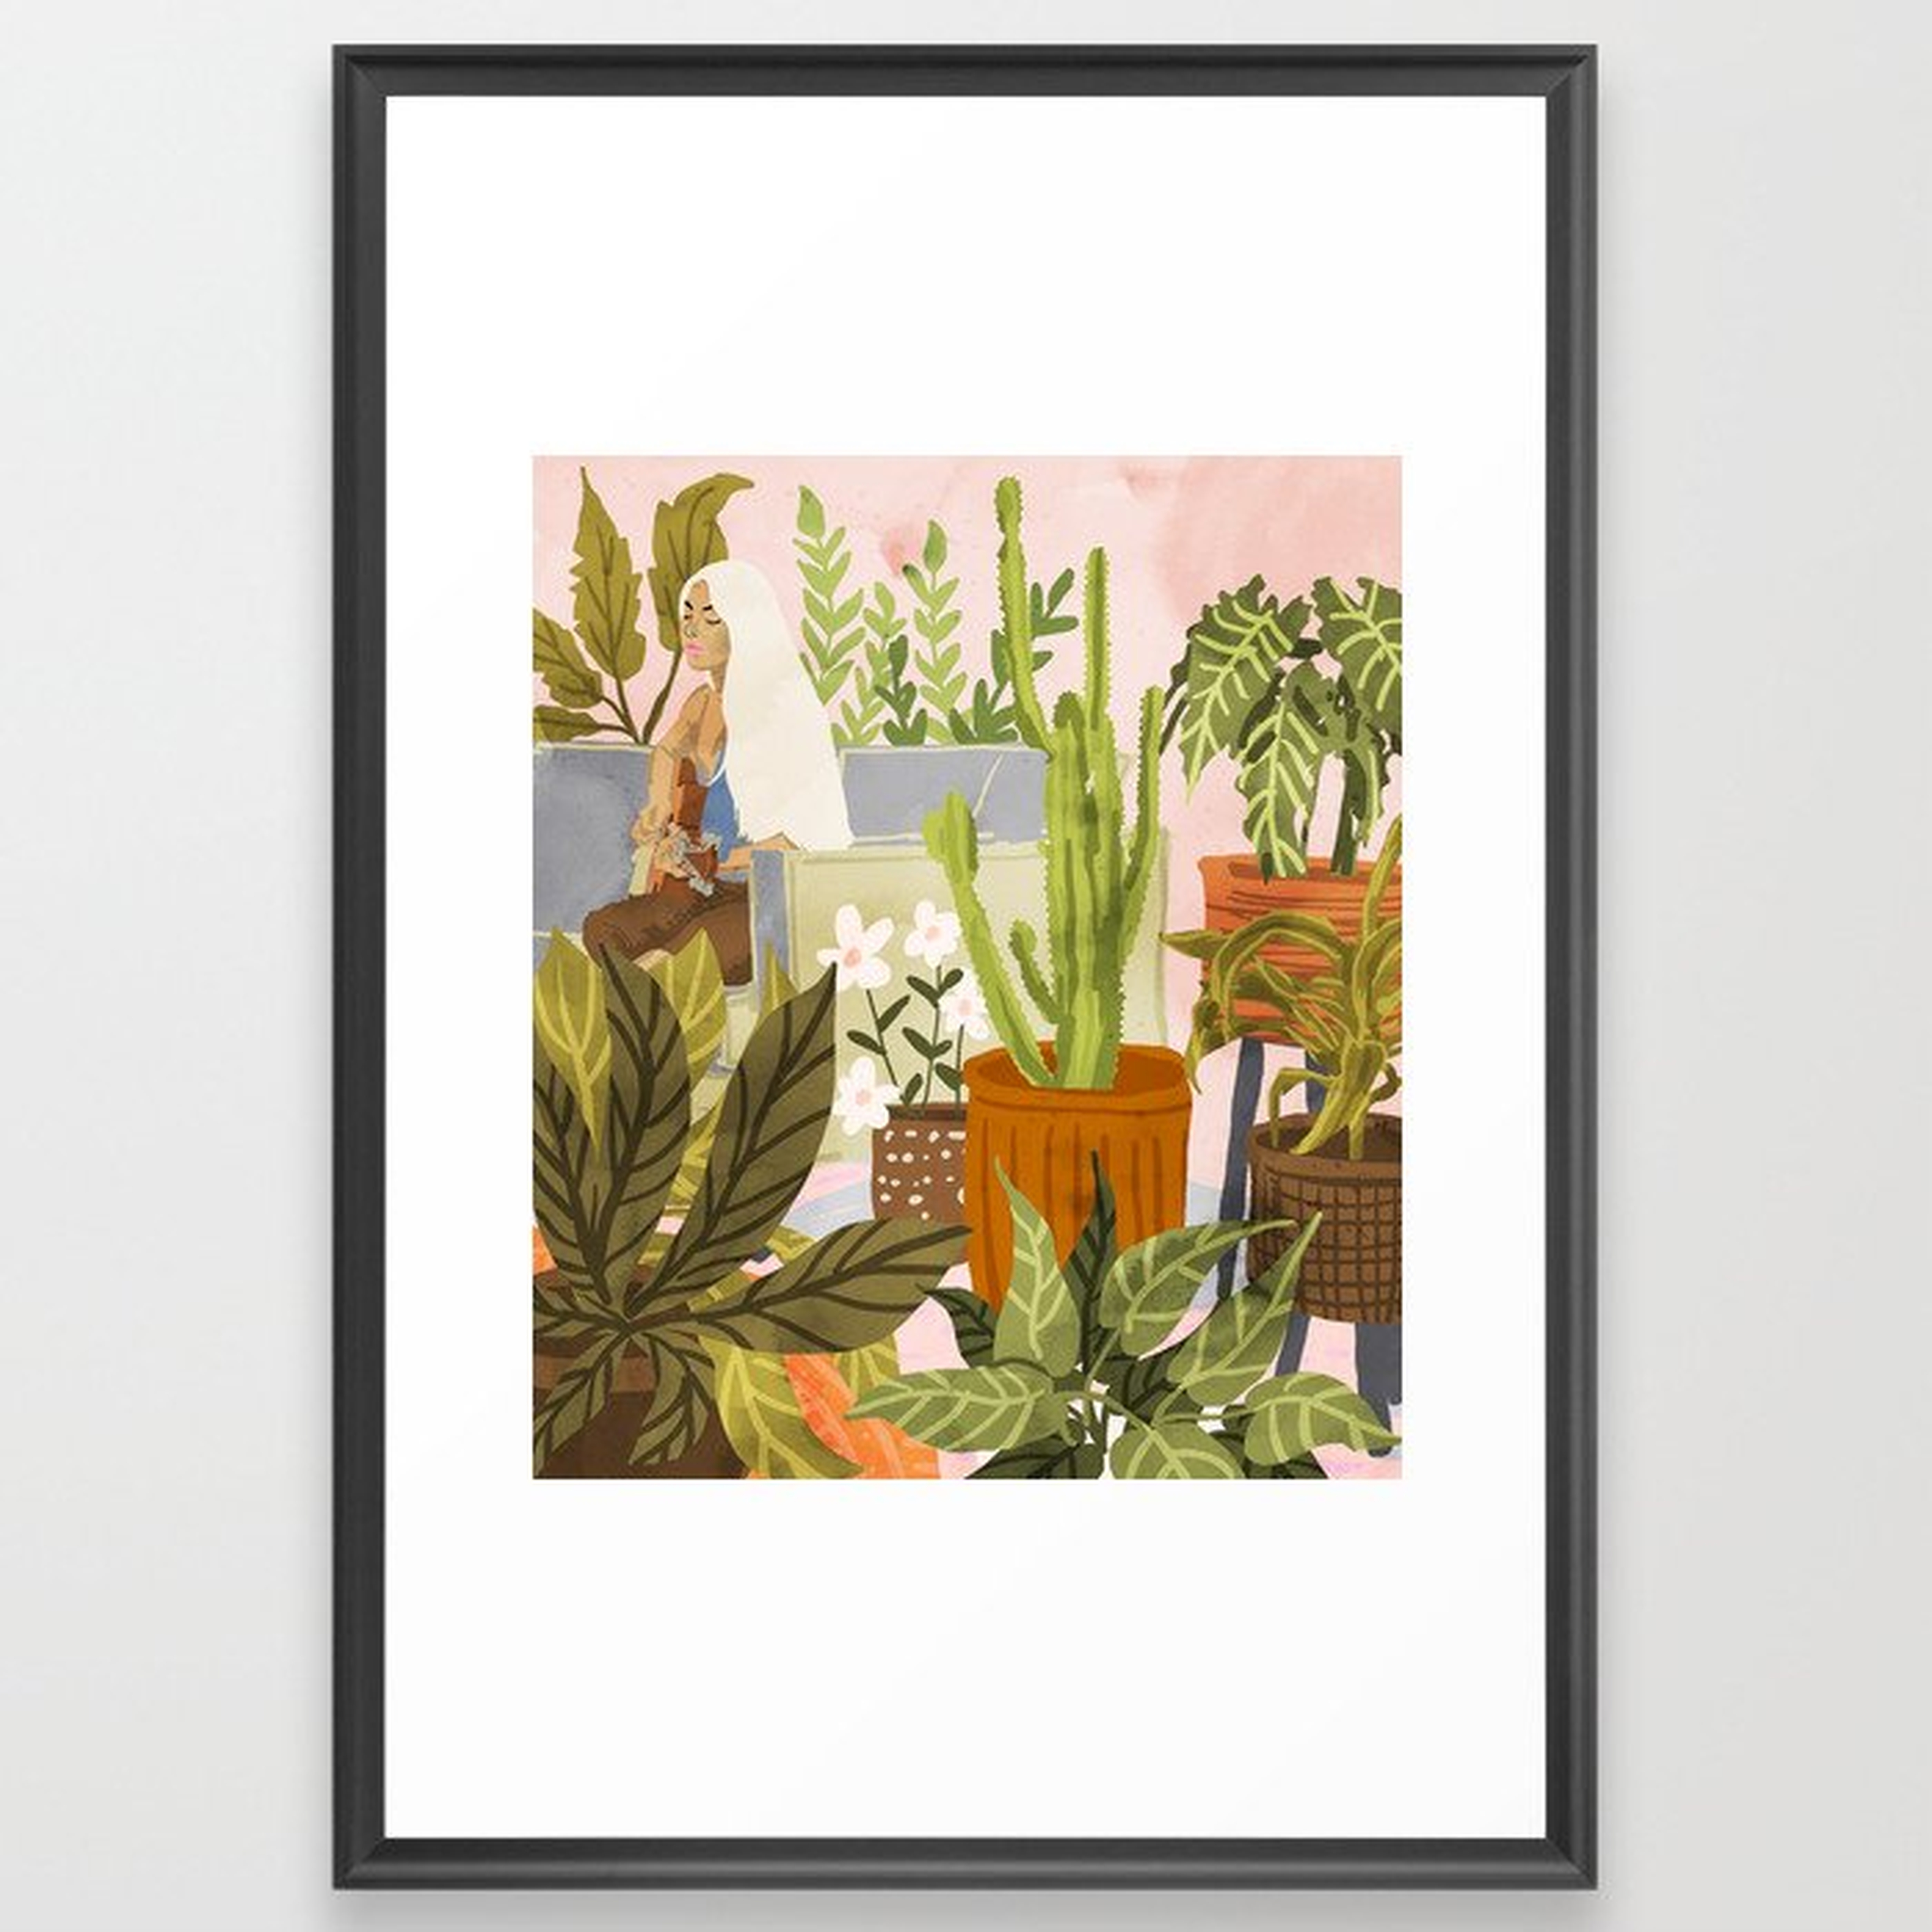 Playing For My Plants Framed Art Print by 83 Oranges Free Spirits - Scoop Black - Large 24" x 36"-26x38 - Society6